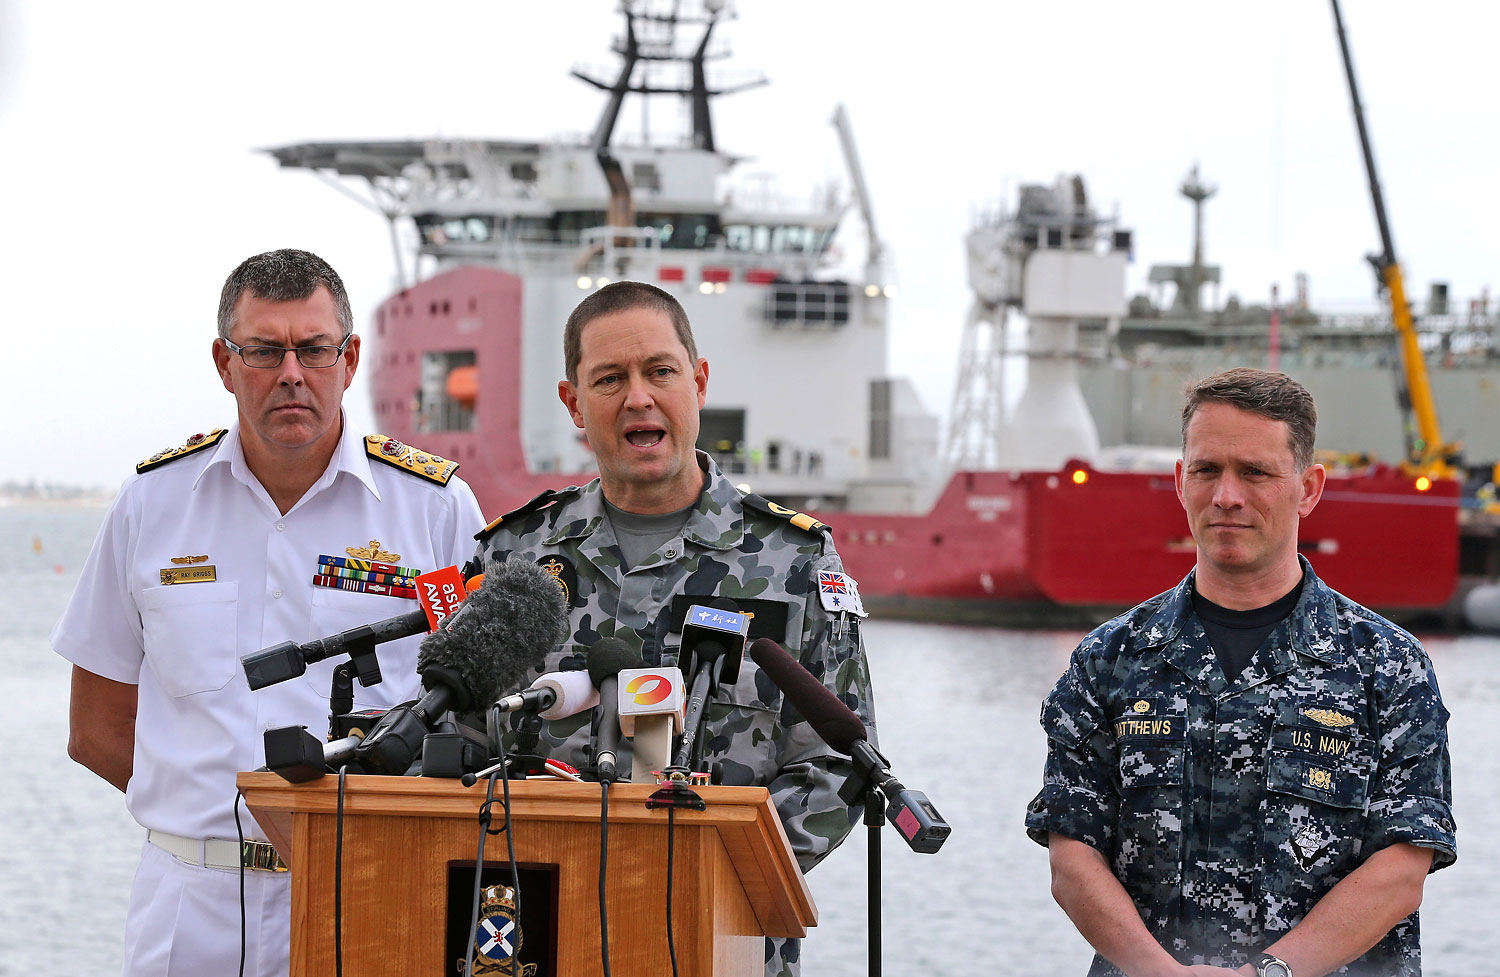 From right, U.S. Navy Captain Mark Matthews, Royal Australian Navy Commodore Peter Leavy and chief of the navy Vice Admiral Ray Griggs speak at a press conference at naval base HMAS Stirling about the search for missing Malaysia Airlines Flight 370 in Perth, Australia, on March 30, 2014 (Rob Griffith—AP)